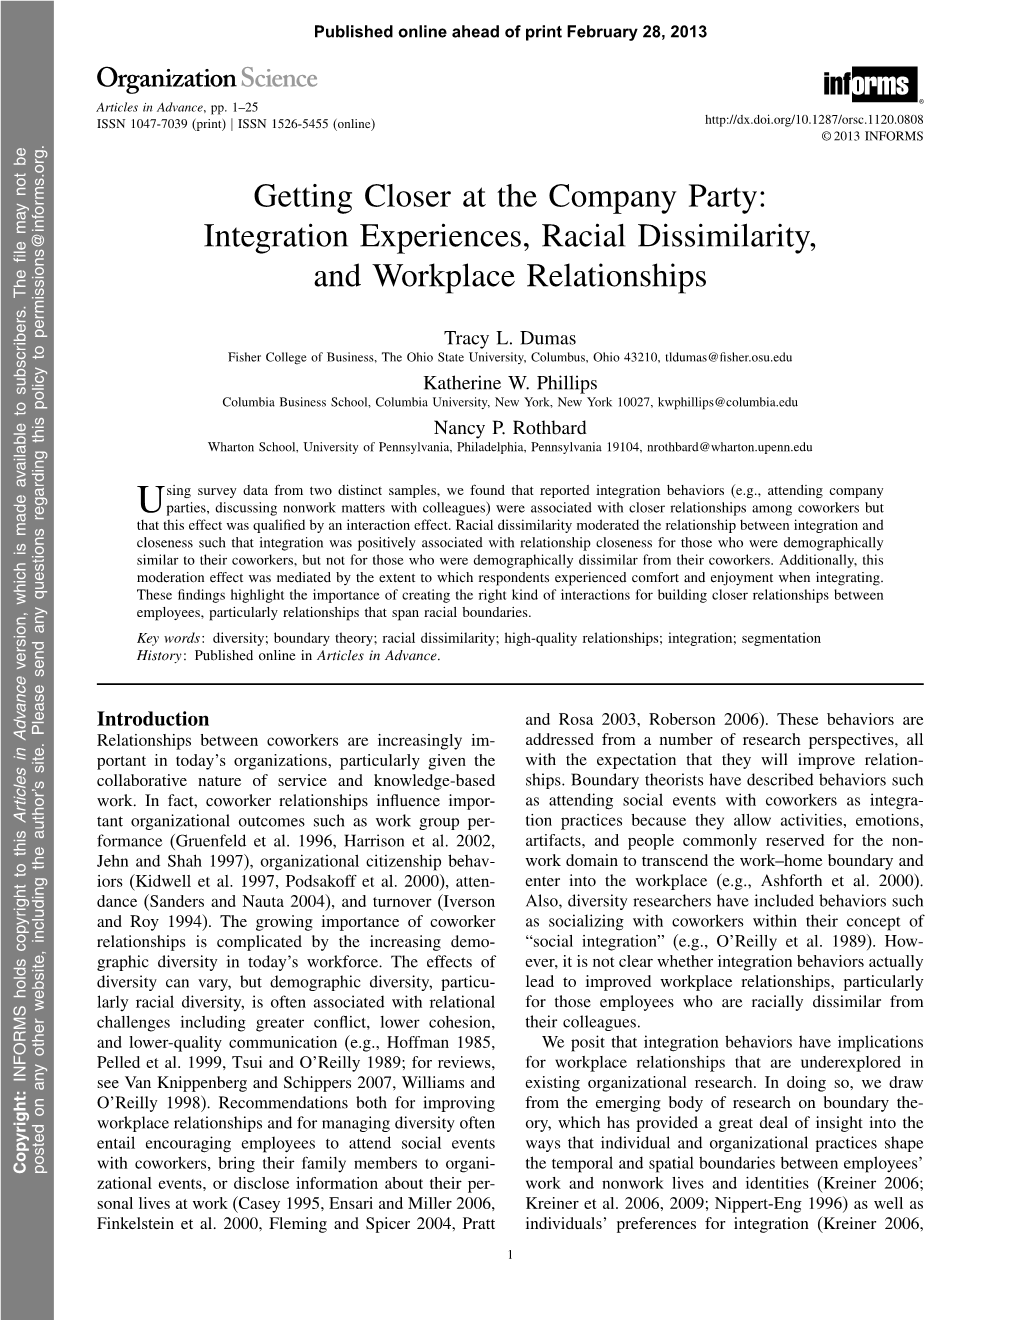 Getting Closer at the Company Party: Integration Experiences, Racial Dissimilarity, and Workplace Relationships